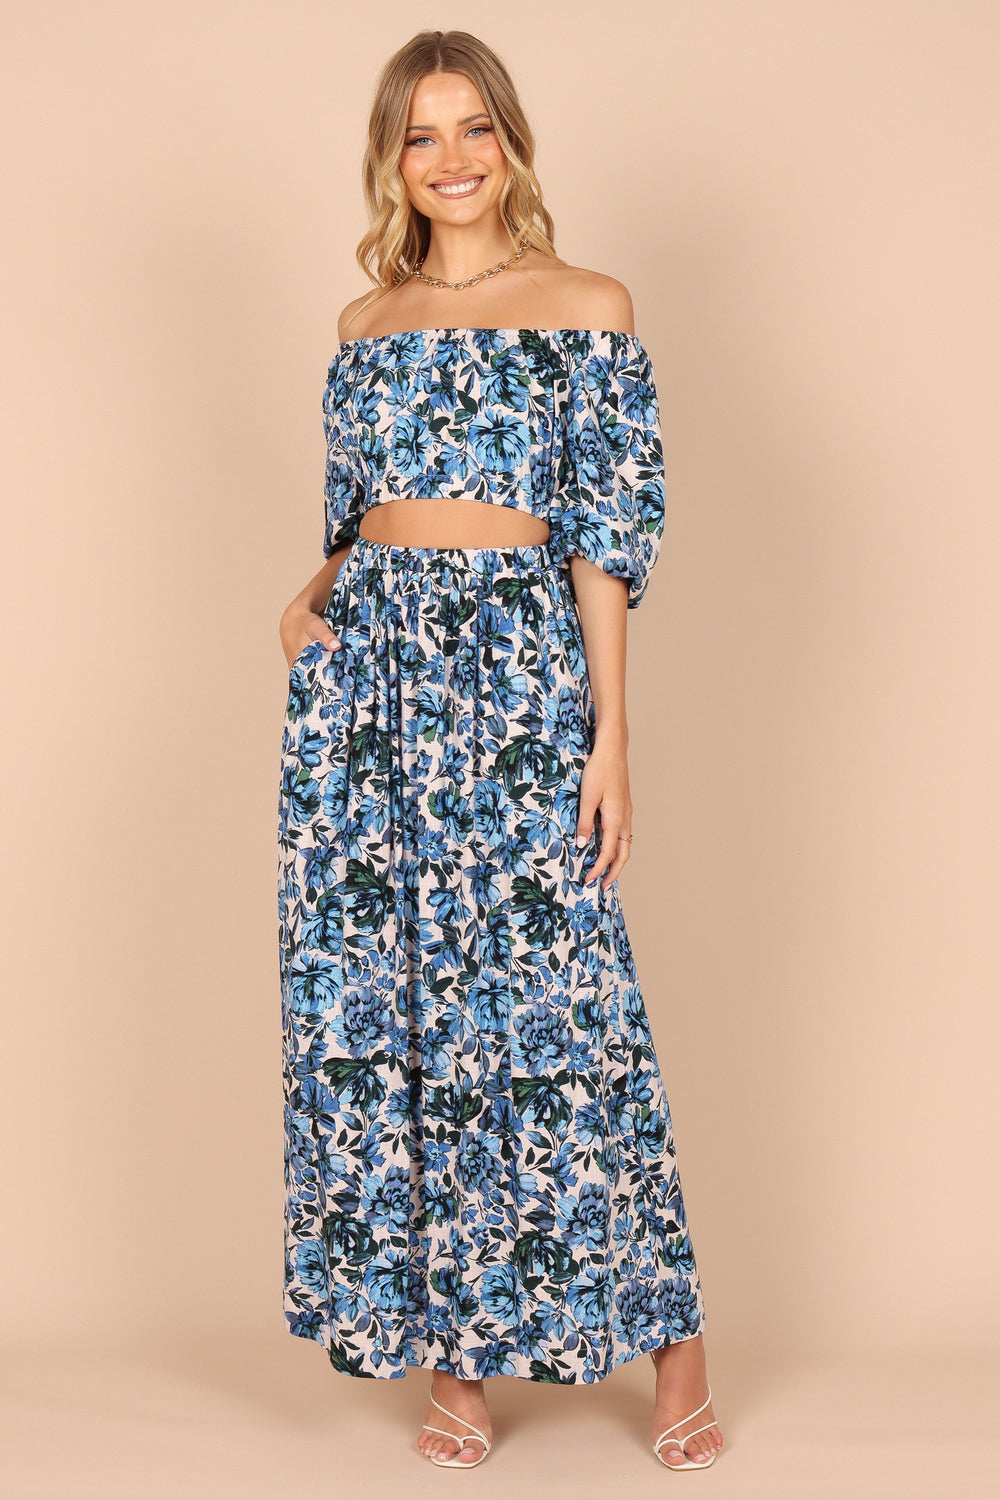 TOPS @Tiffany Cropped Top - Blue Floral (waiting on bulk)